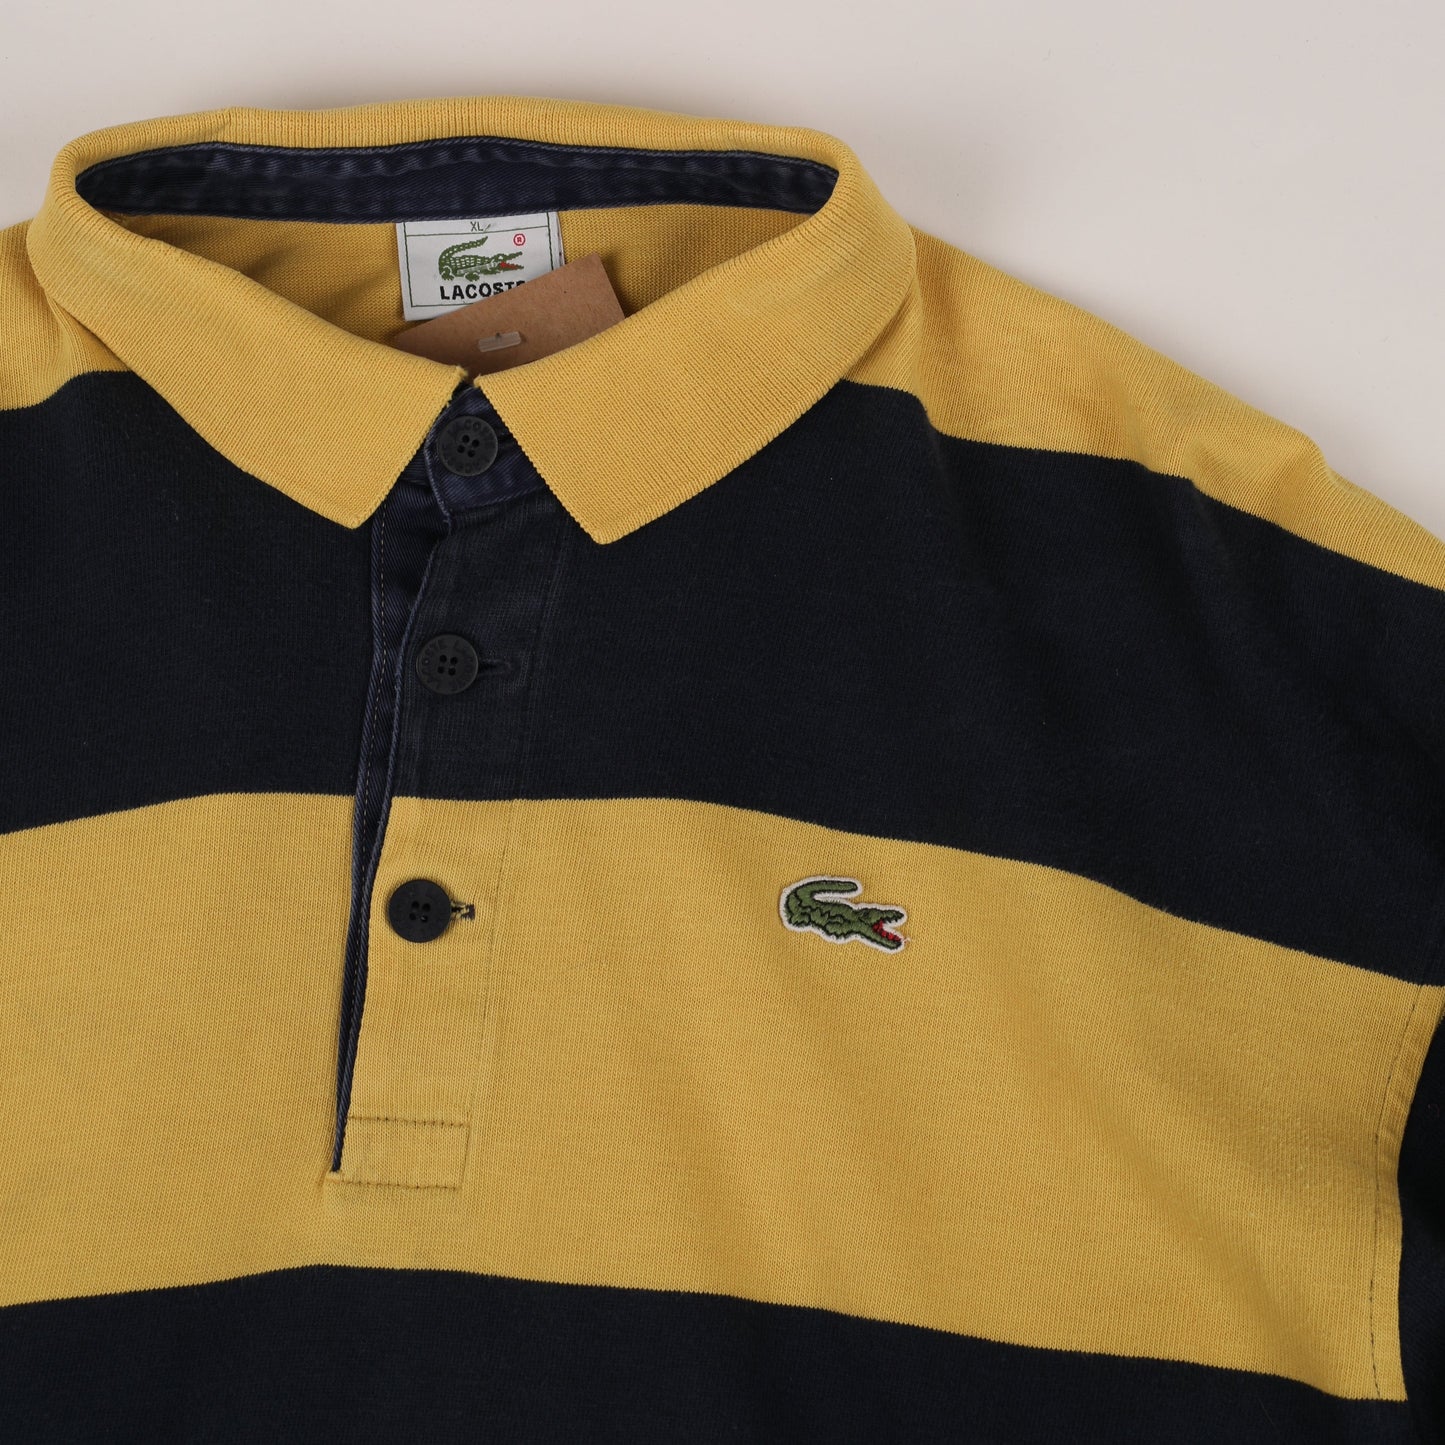 90s Lacoste stripe Rugby shirt (XL)